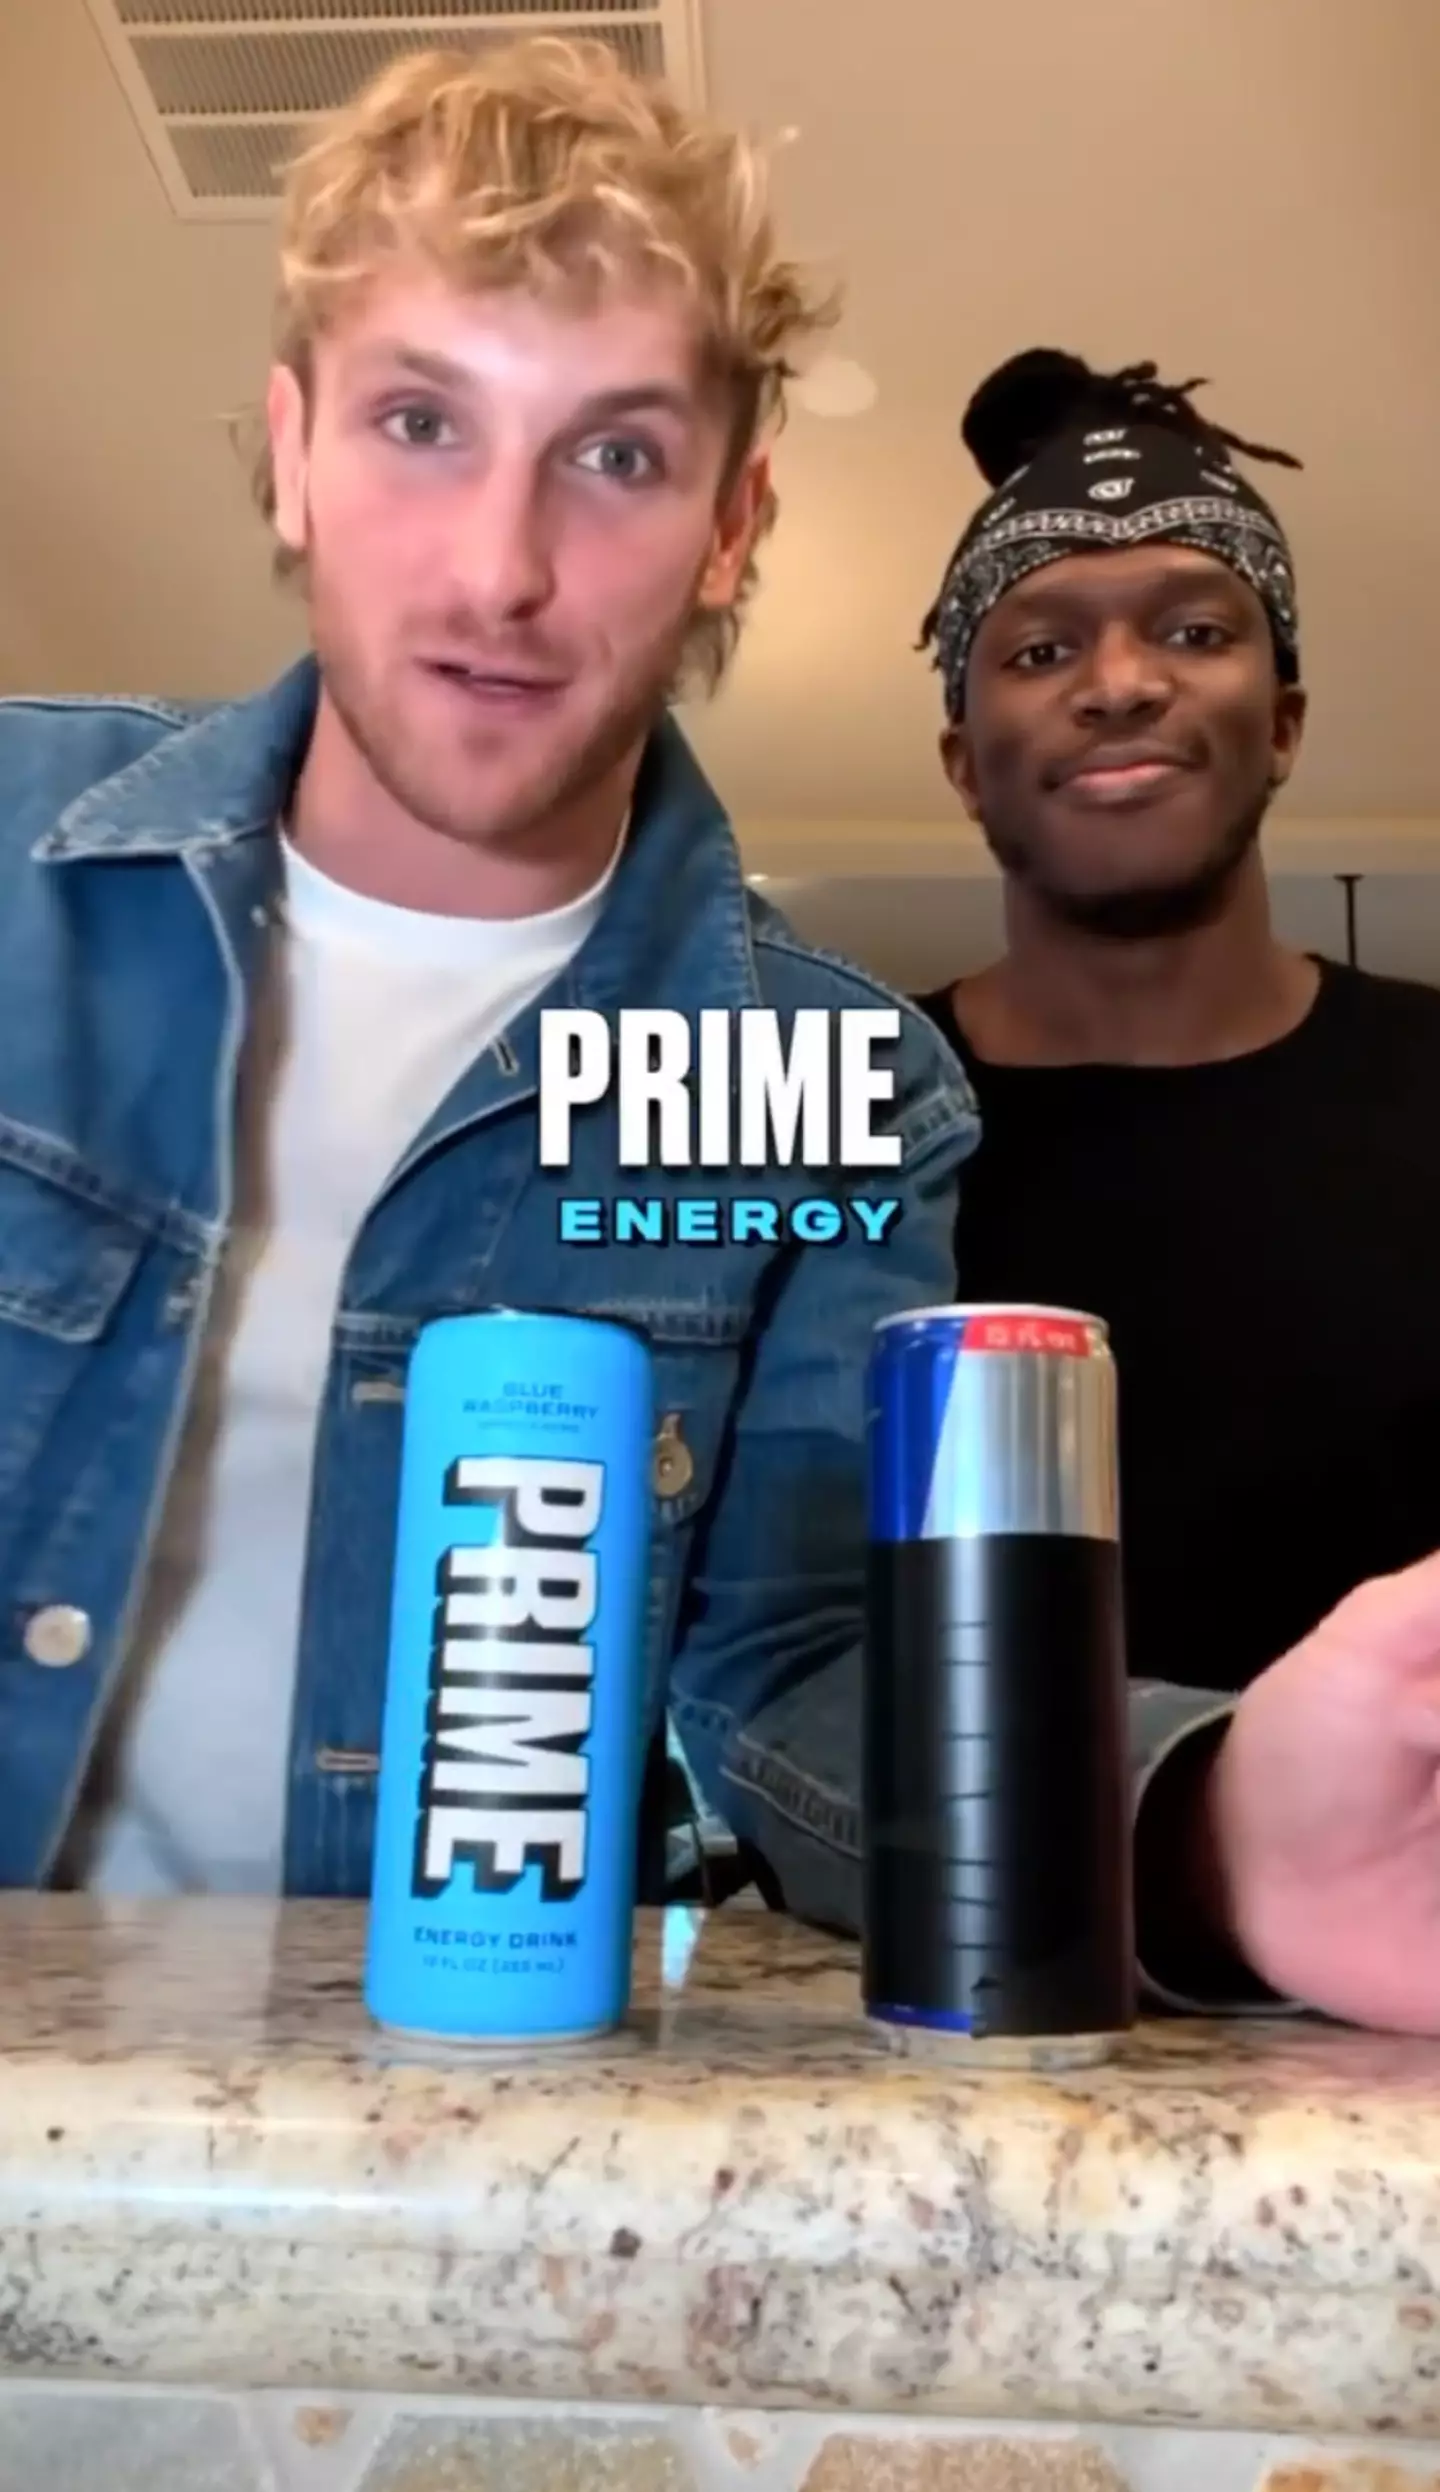 The duo compared their new Prime Energy to the best selling brand.